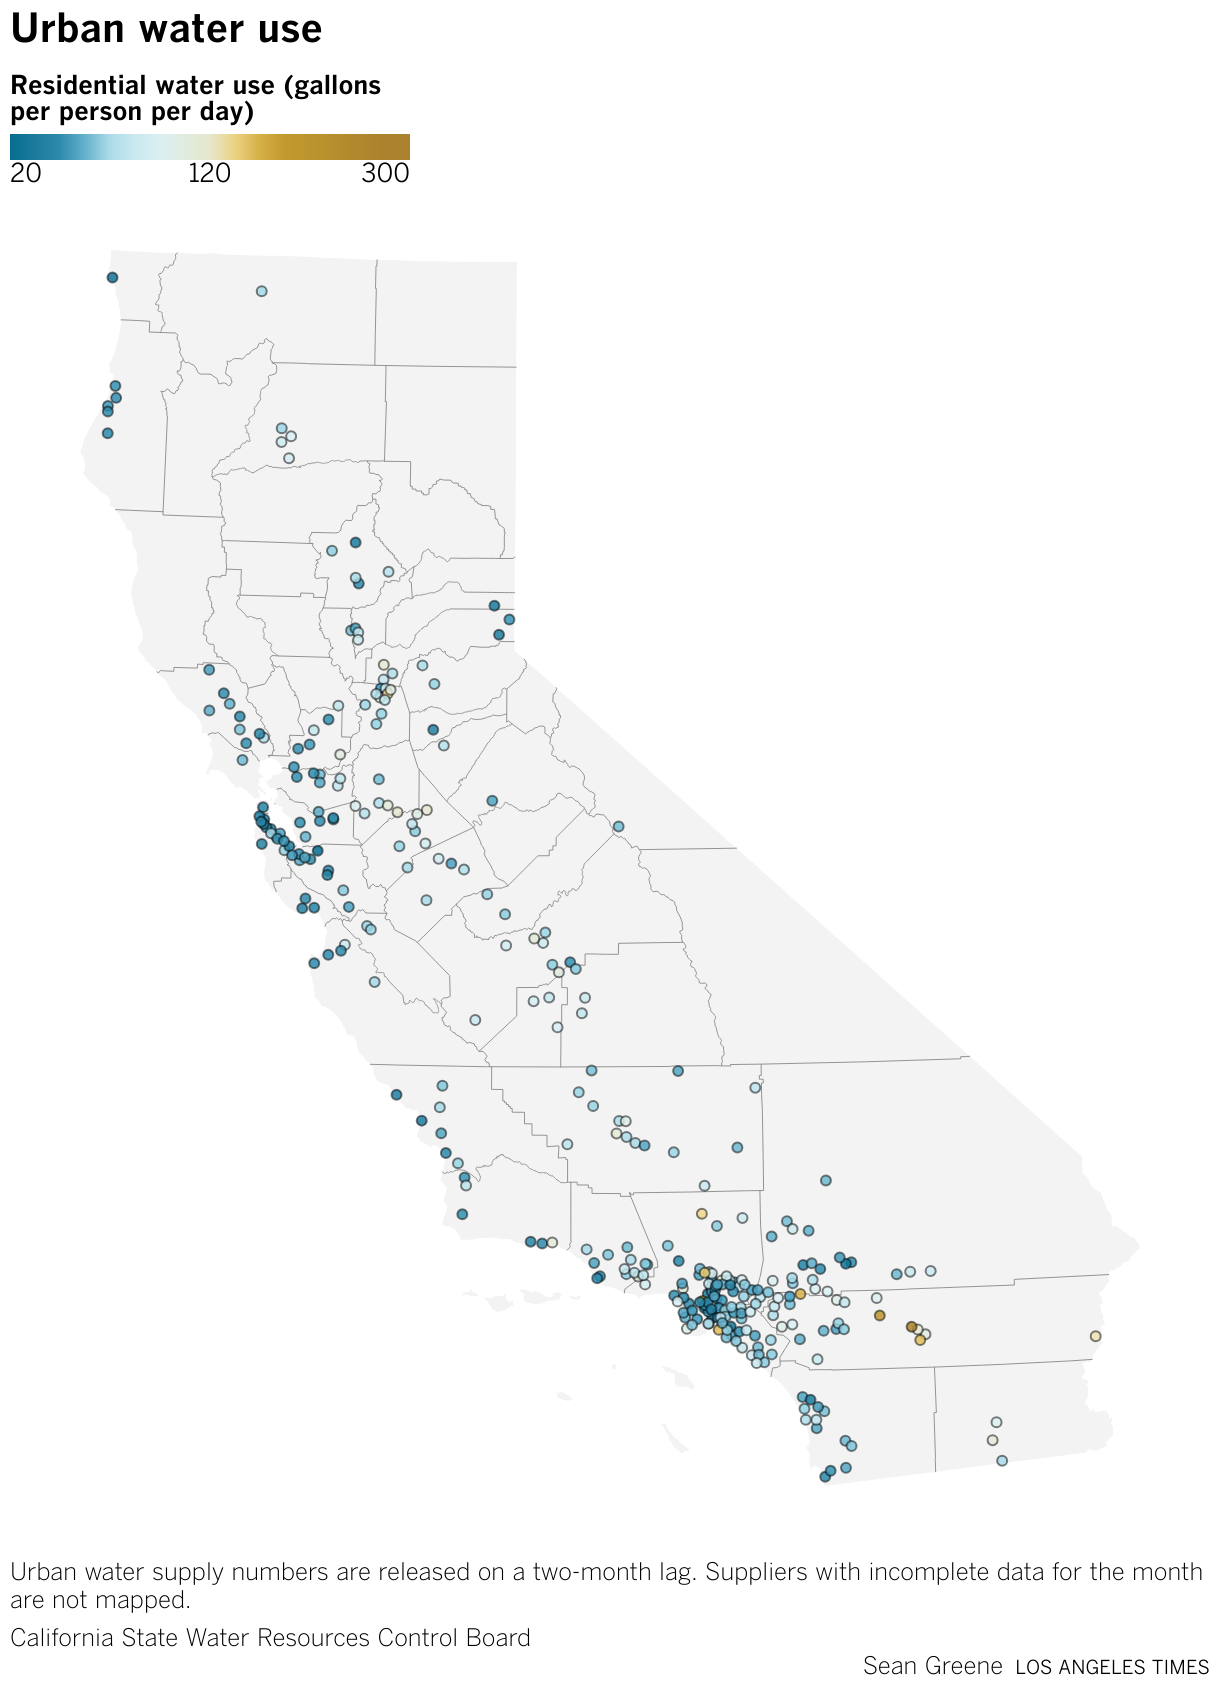 Interactive map shows residential water use per capita across California